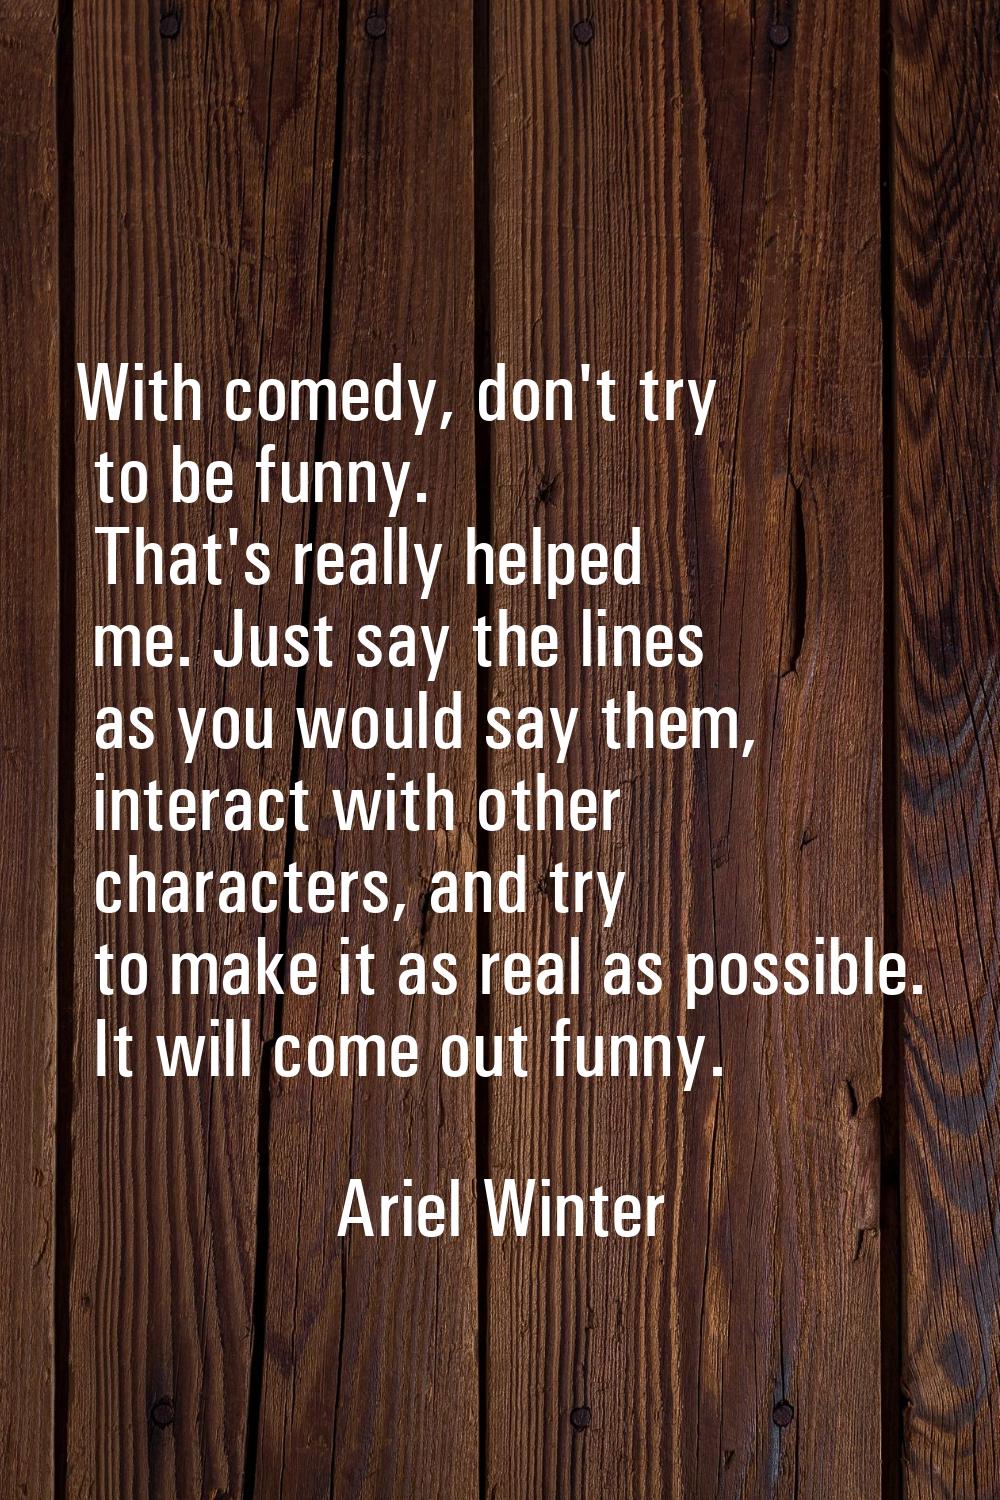 With comedy, don't try to be funny. That's really helped me. Just say the lines as you would say th